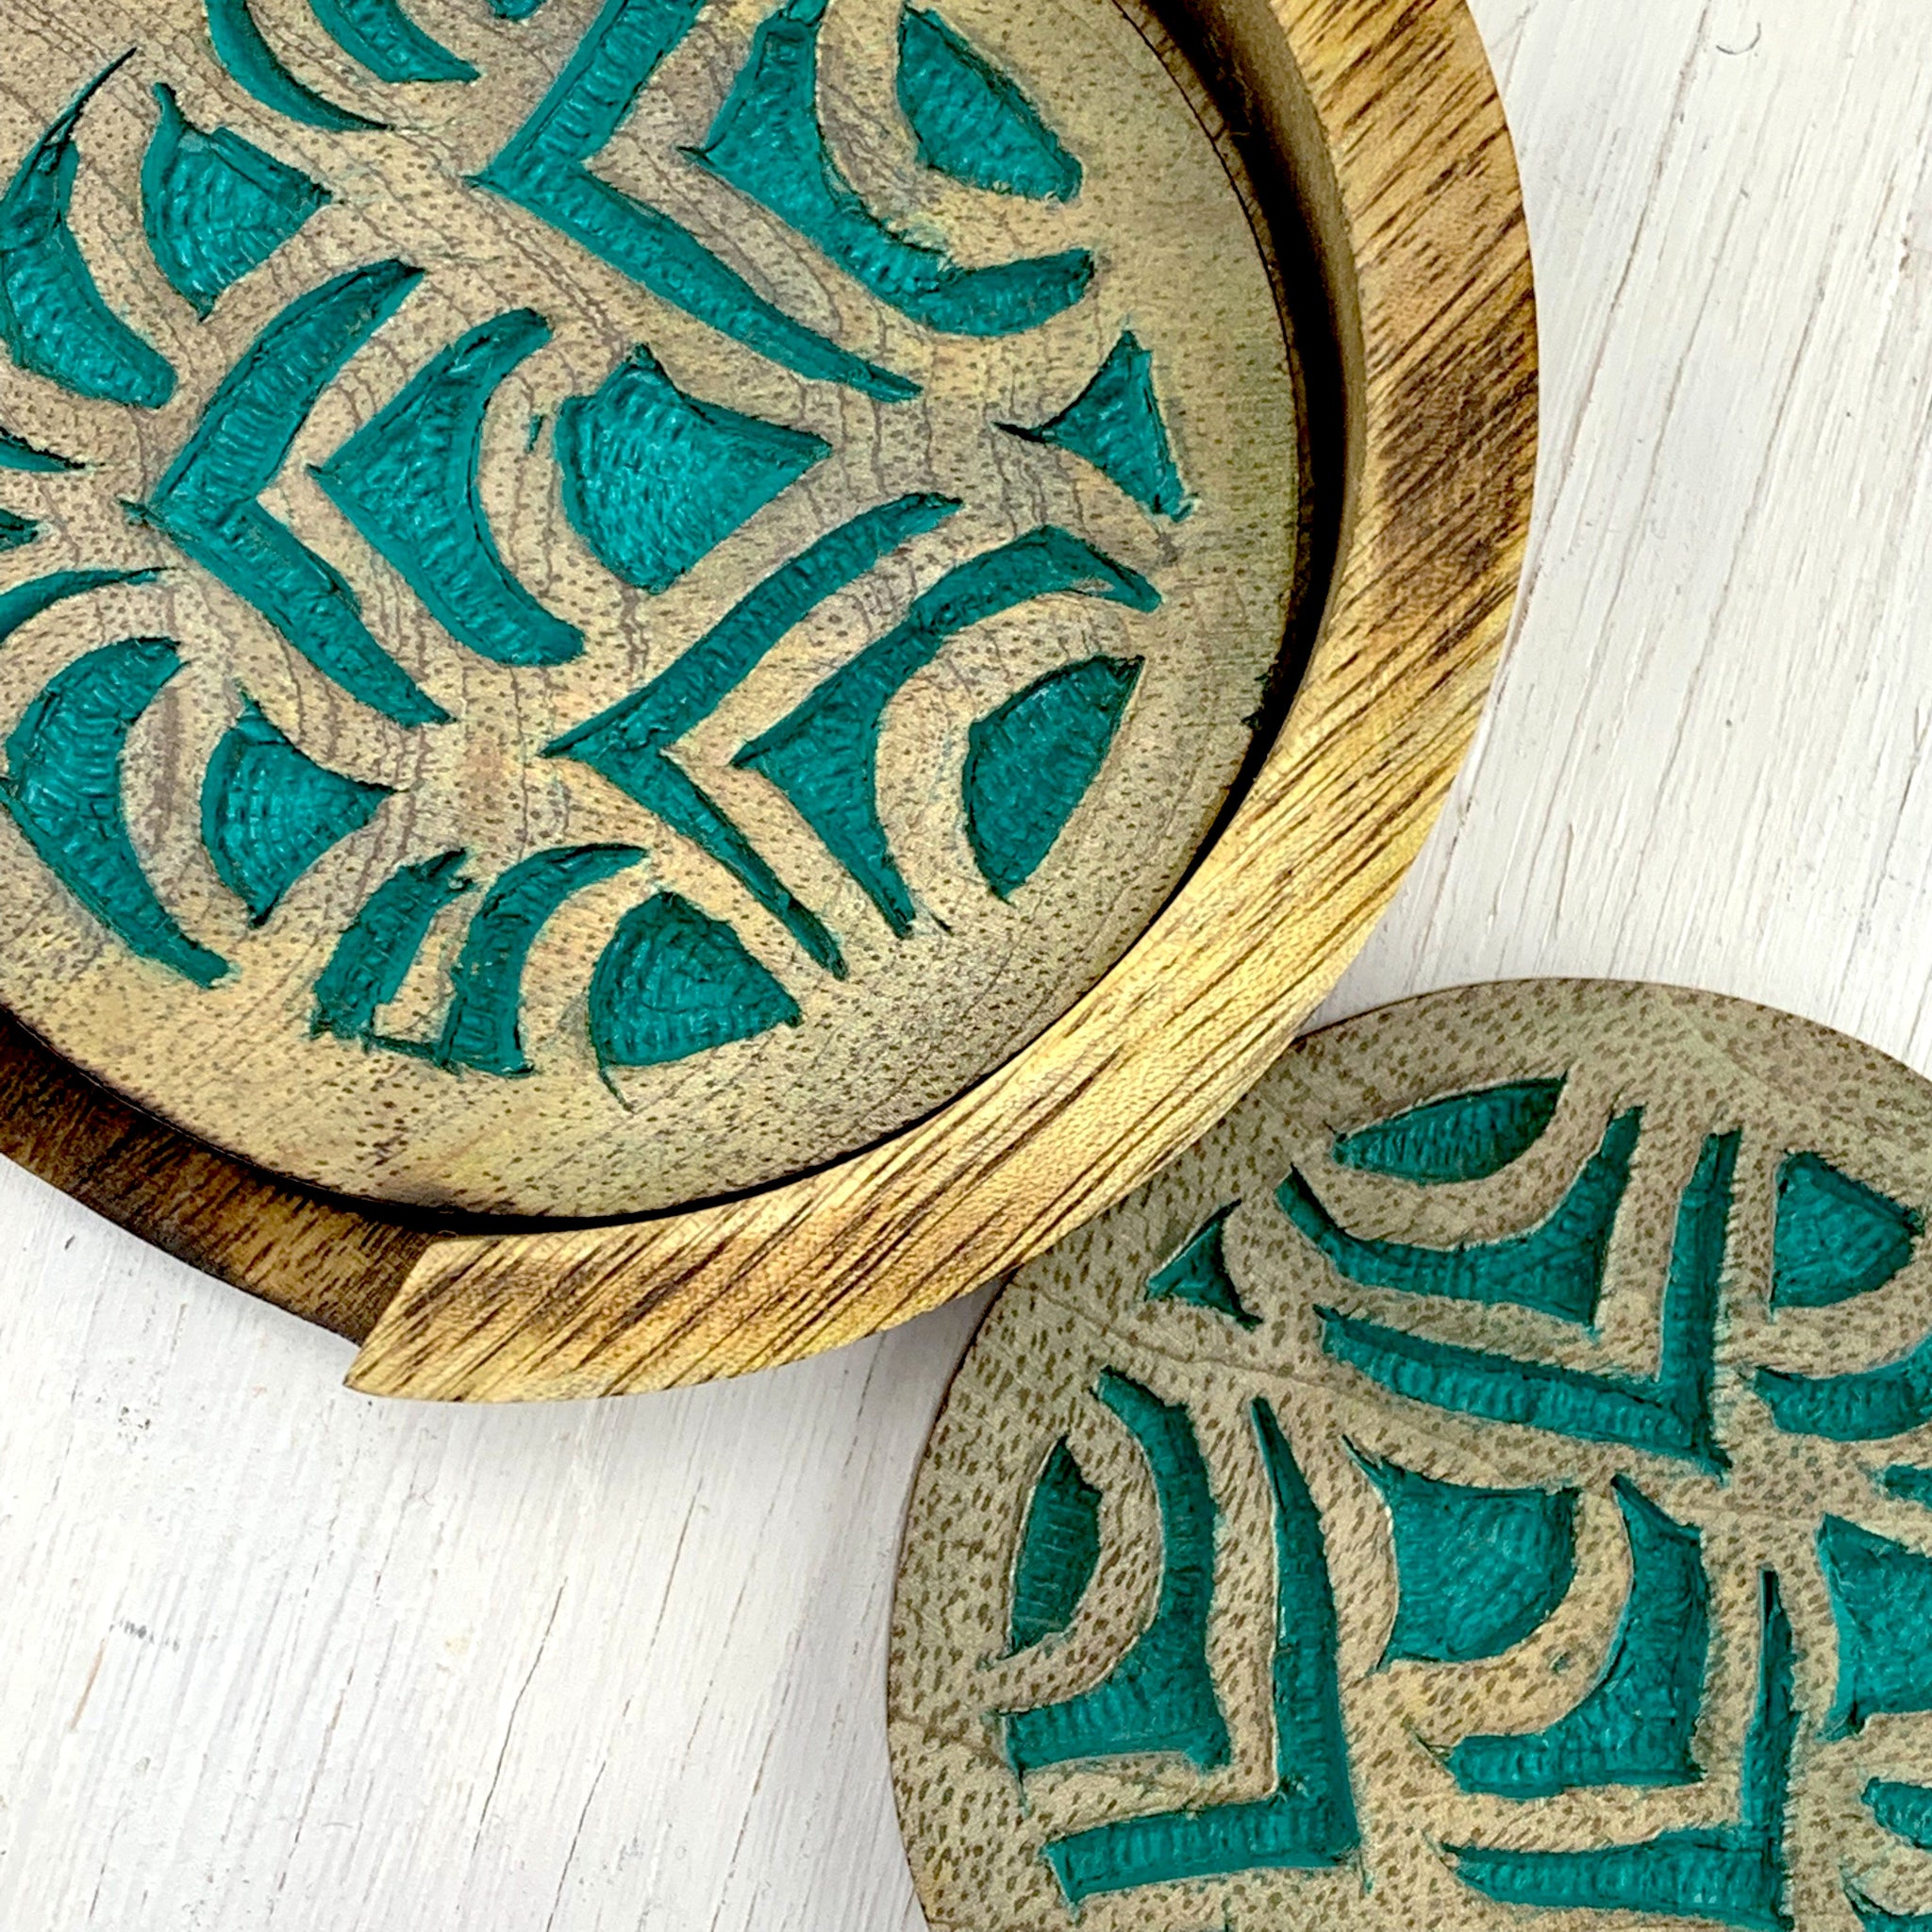 carved teal peacock feather design coaster set